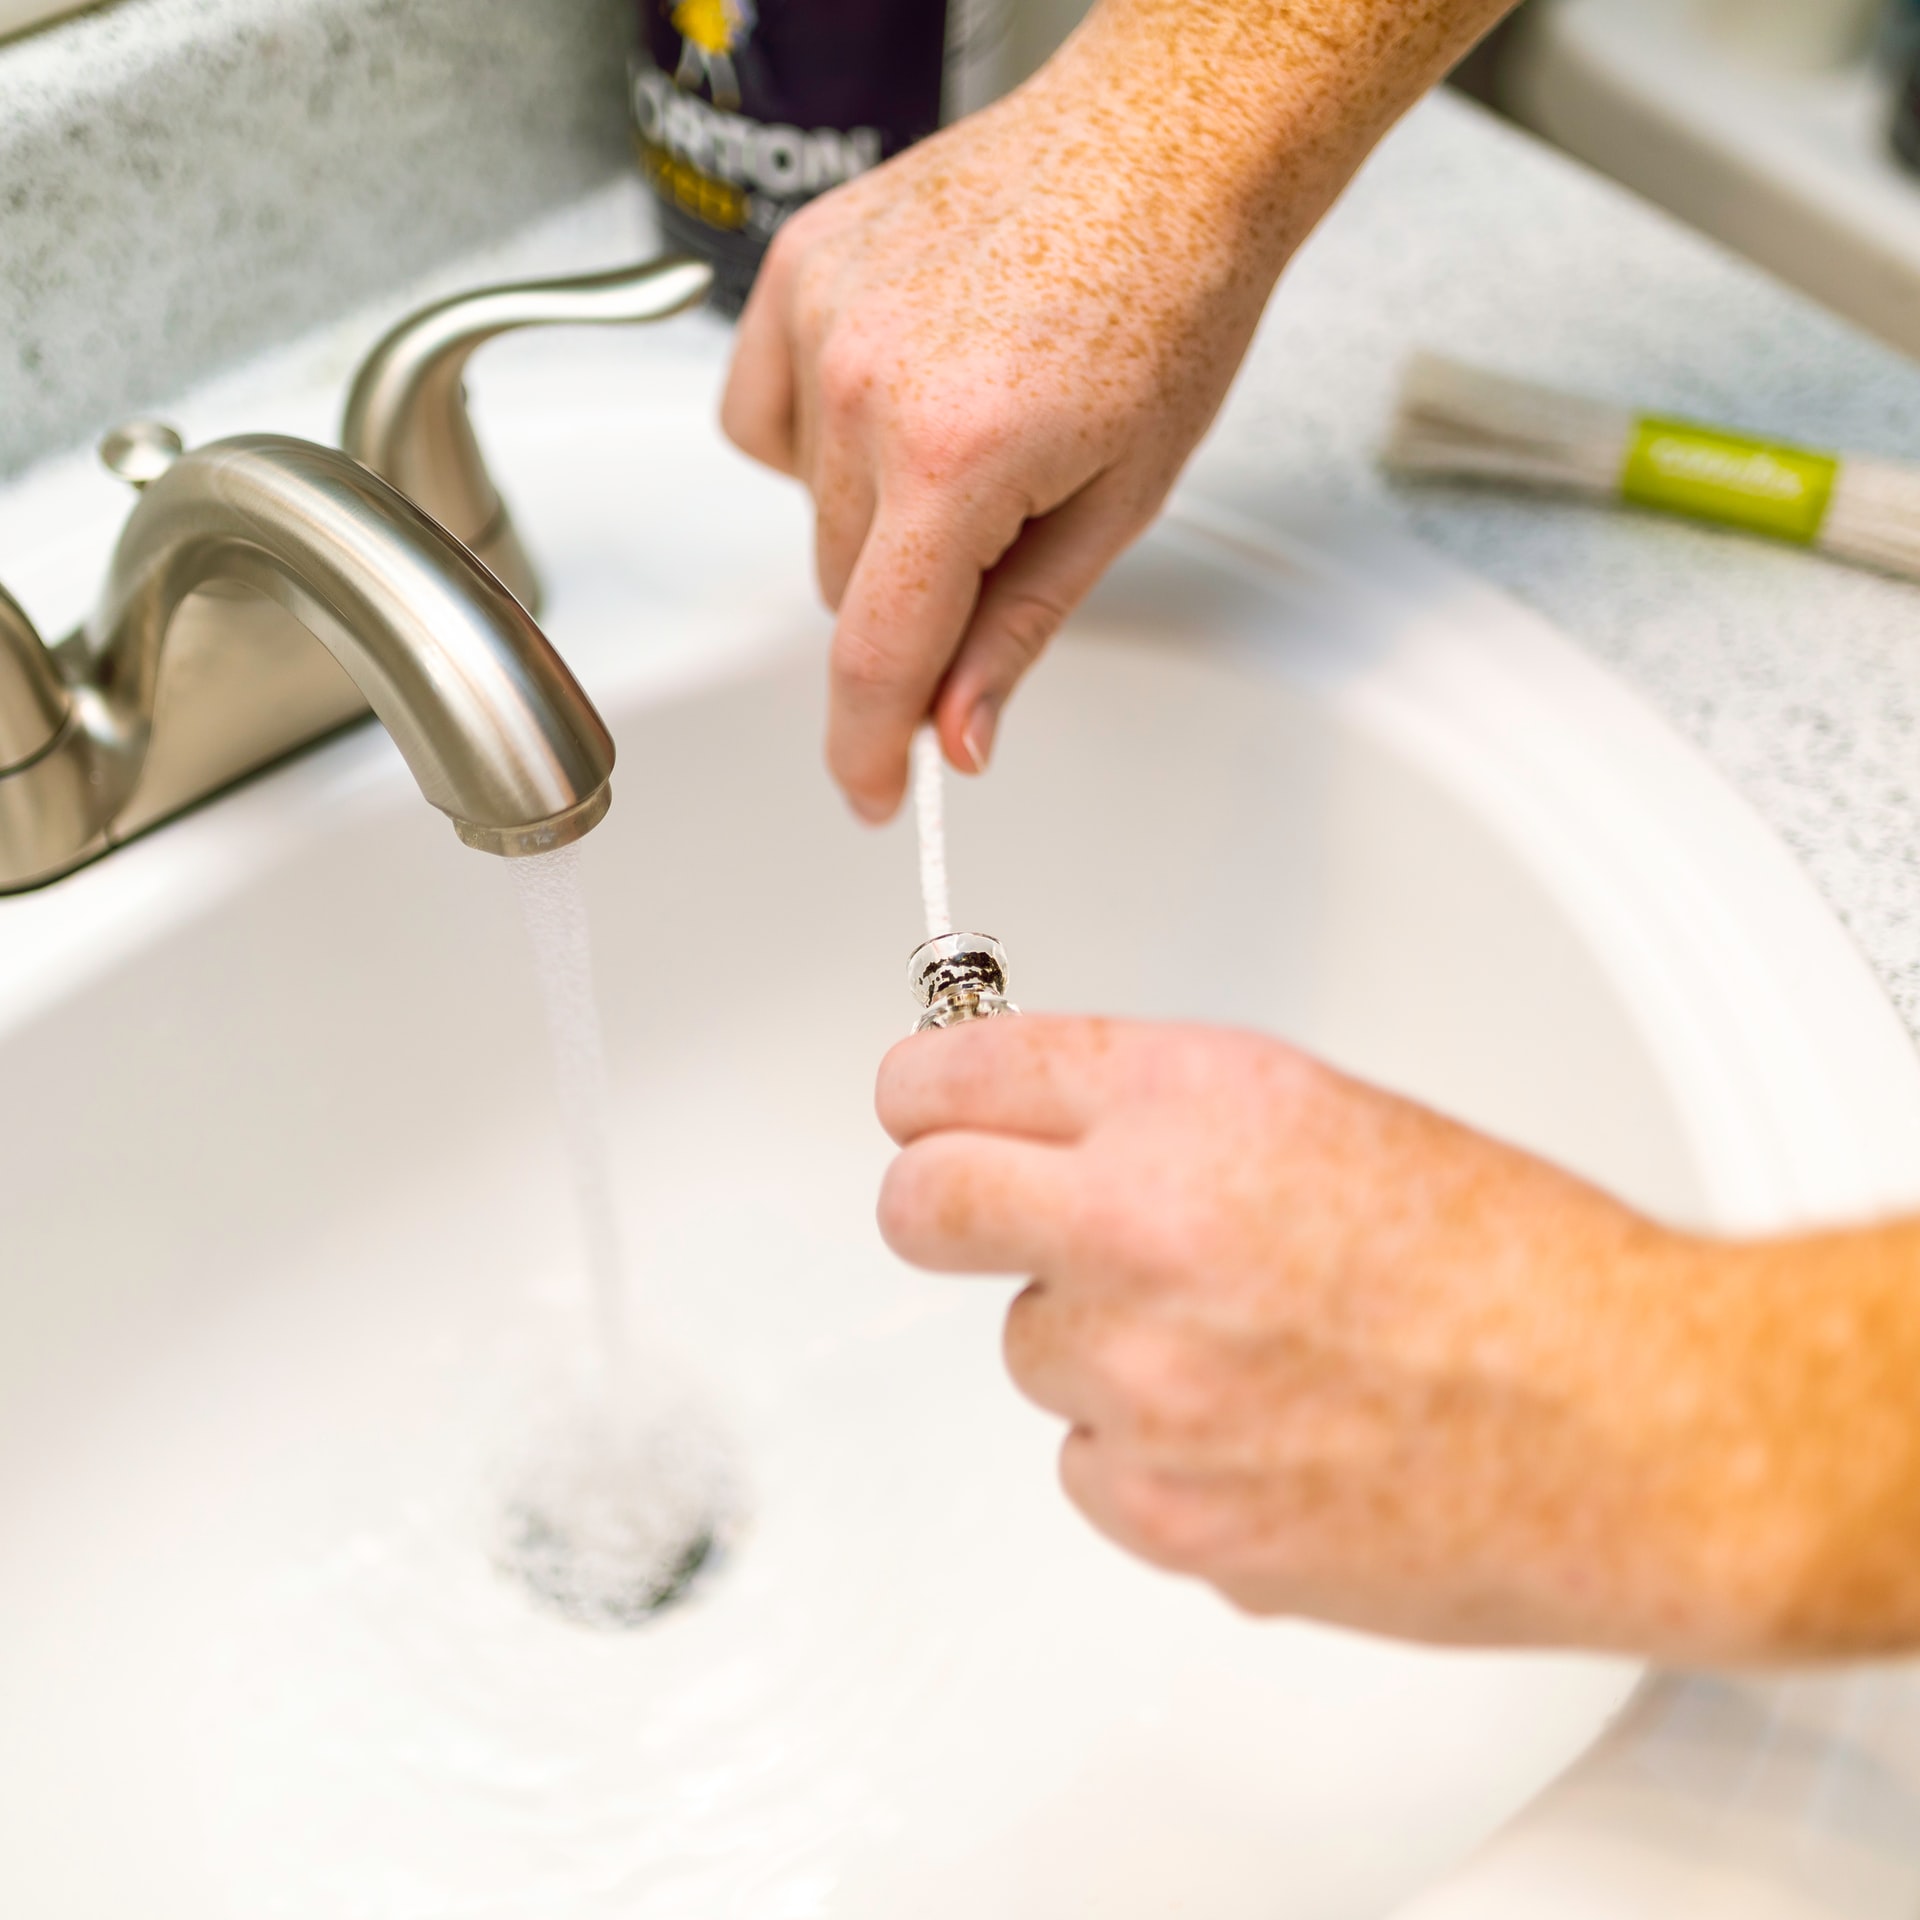 DIY Drain Cleaning and Why it Can be a Bad Idea